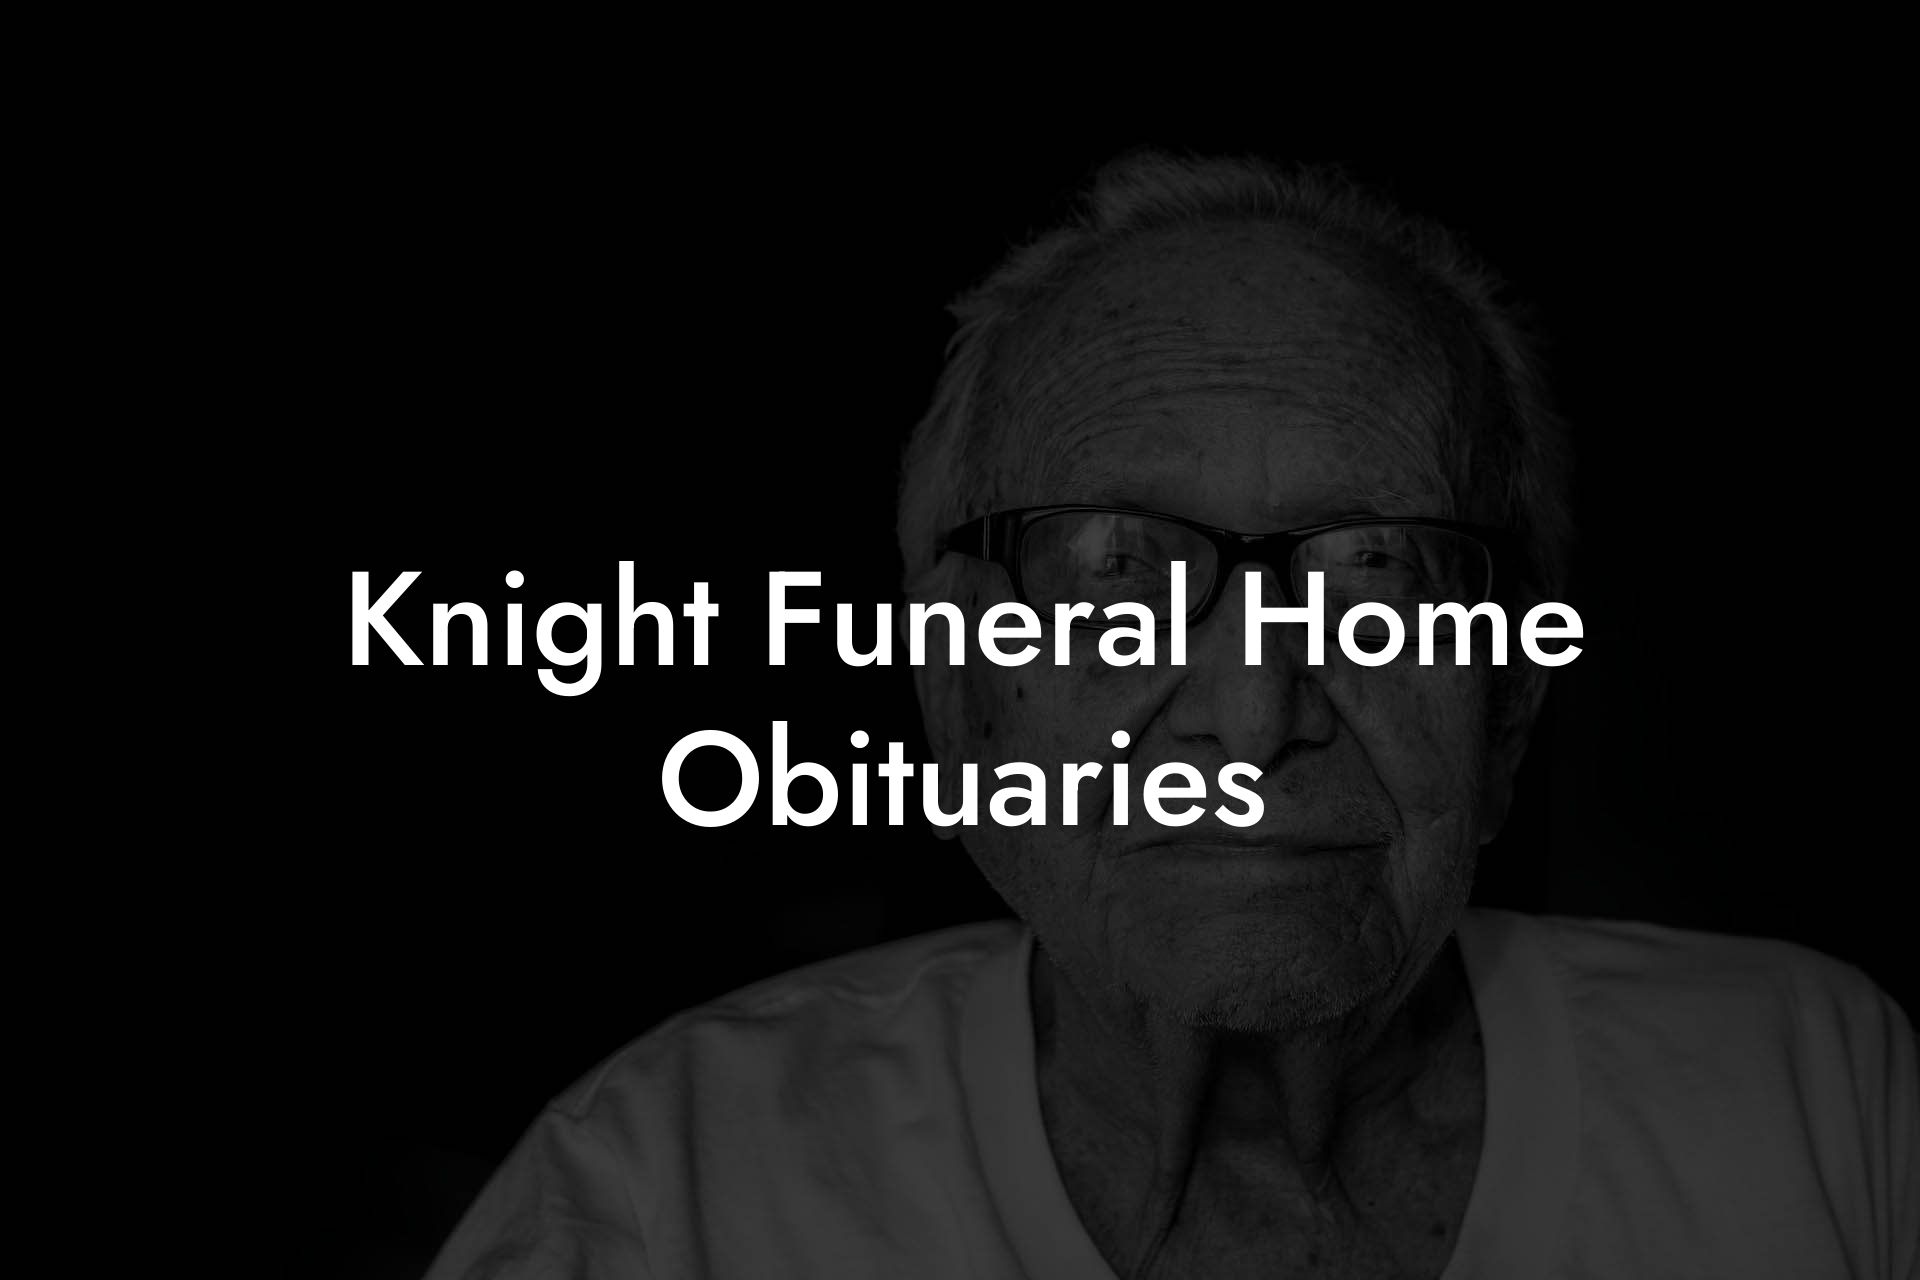 Knight Funeral Home Obituaries